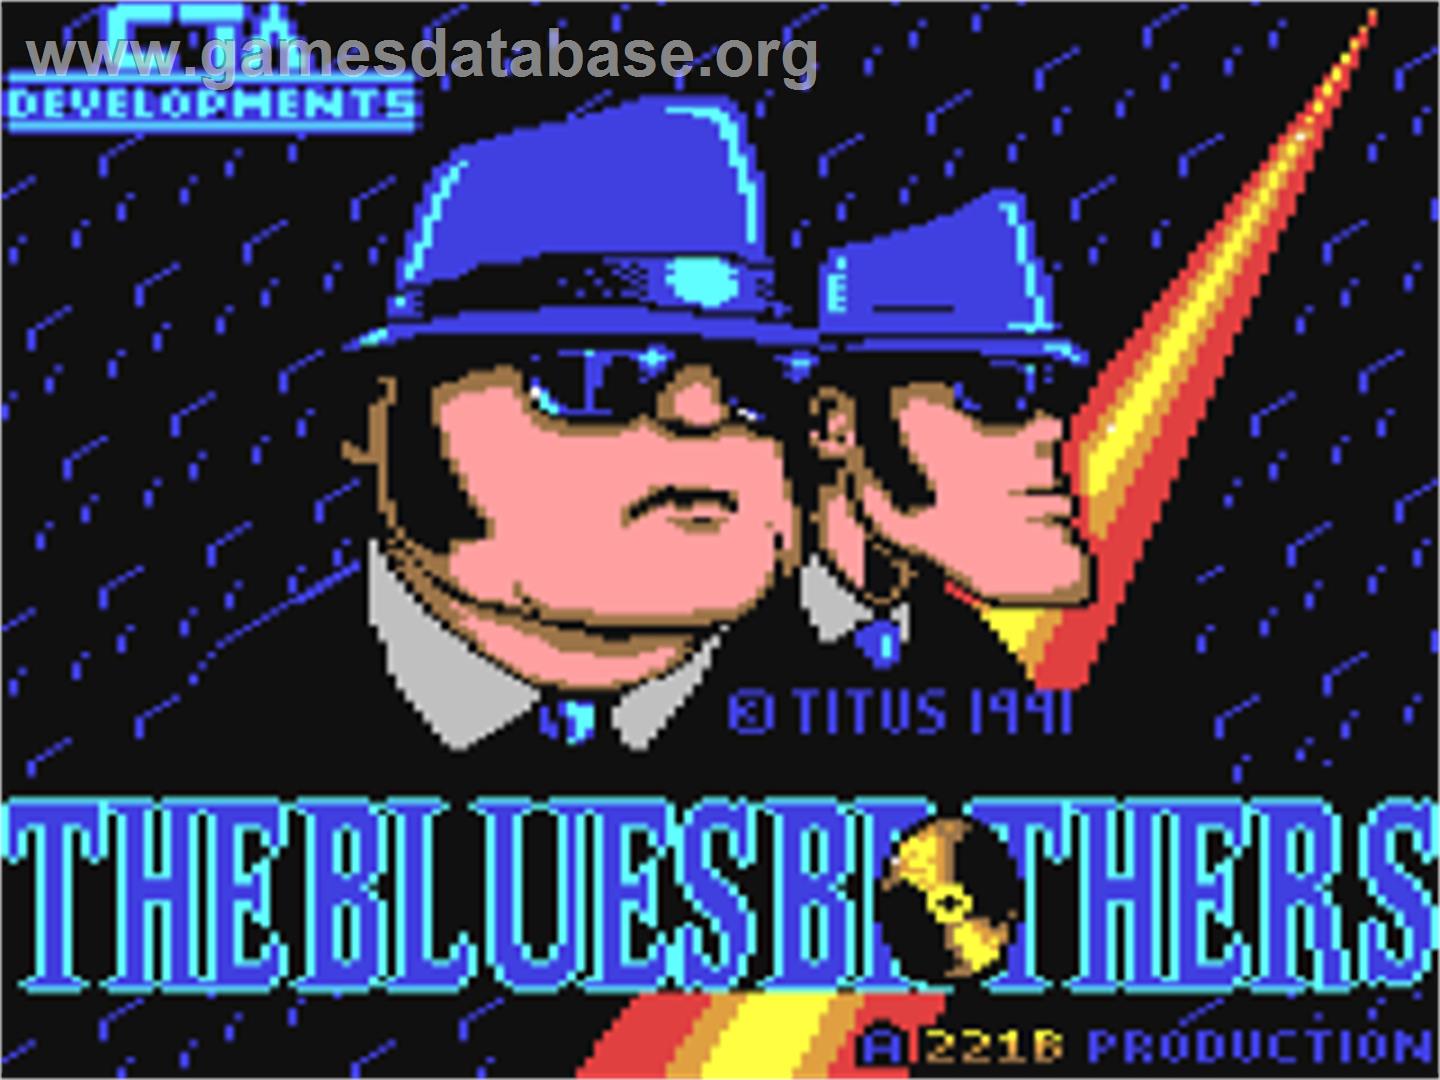 The Blues Brothers - Commodore 64 - Artwork - Title Screen